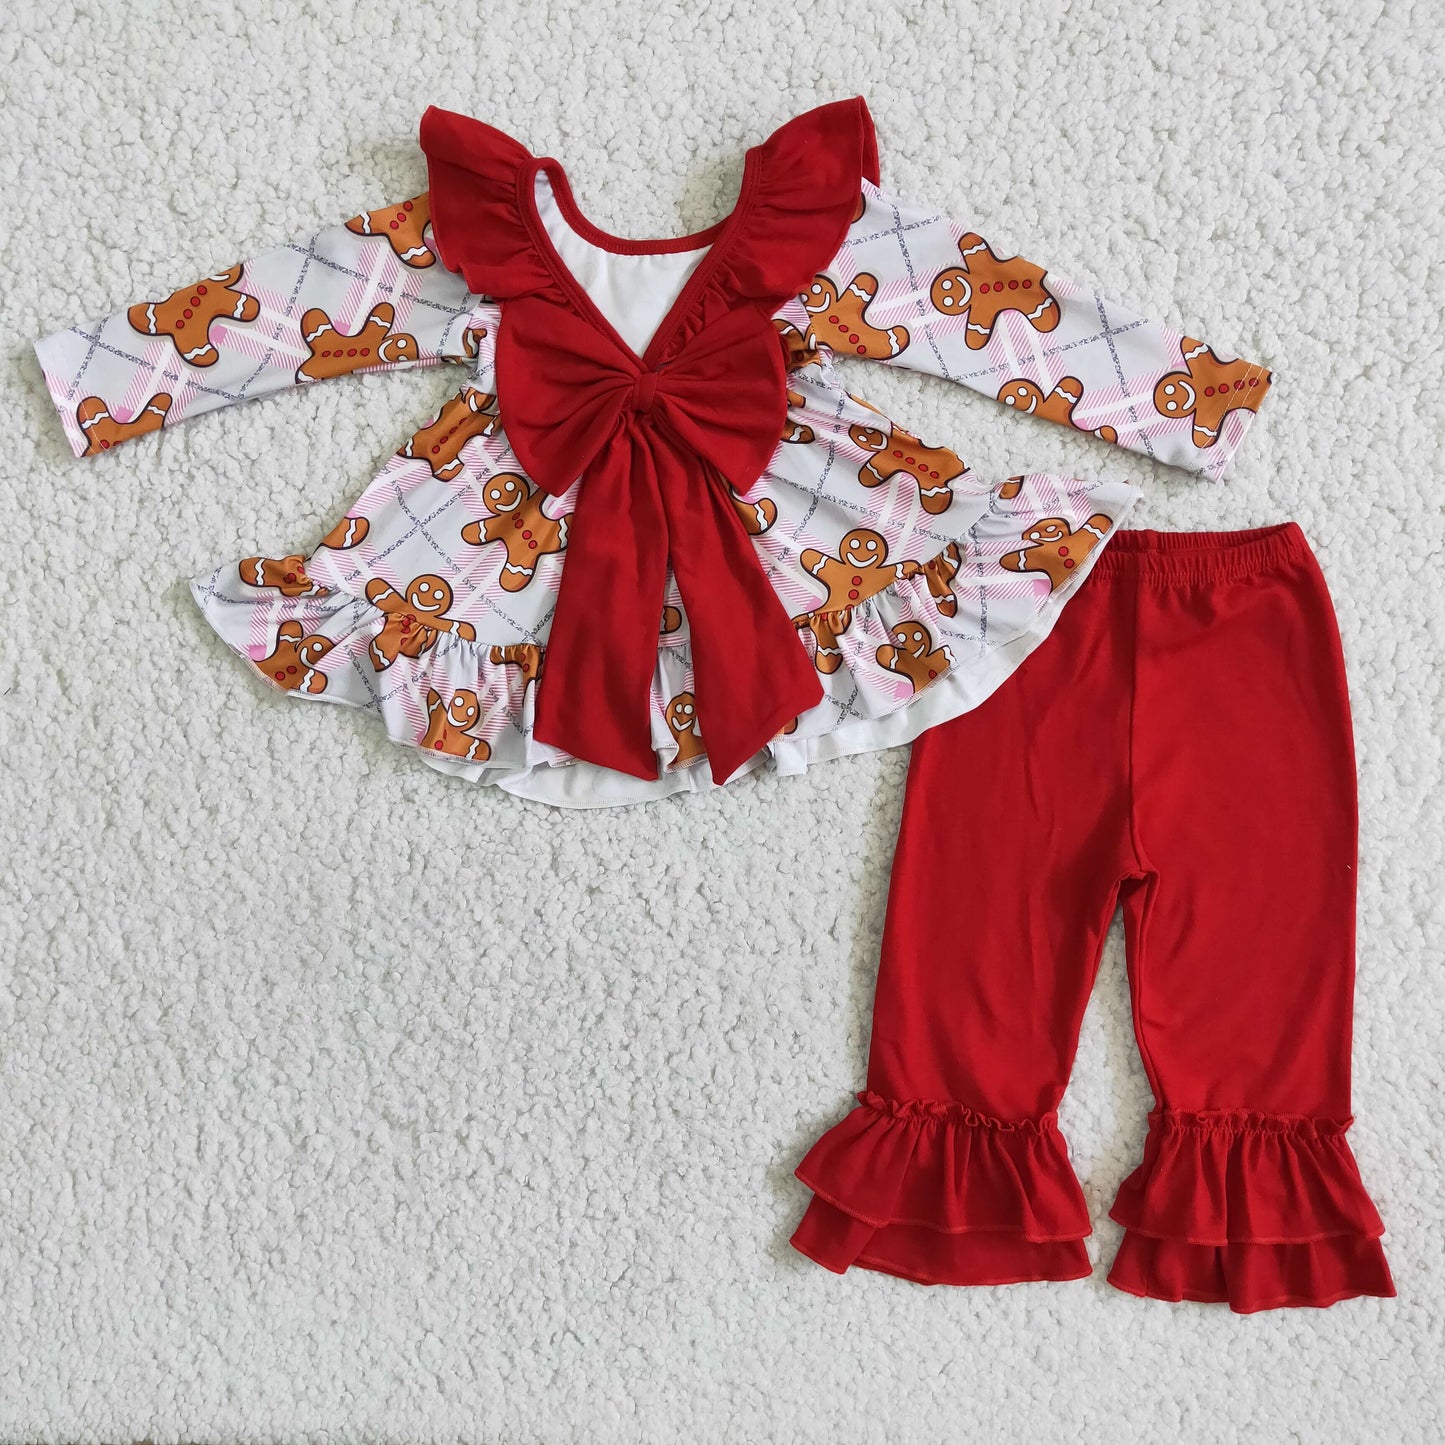 6 B8-5 Girls Outfit Gingerbread Man Print Trousers Christmas Boutique Set